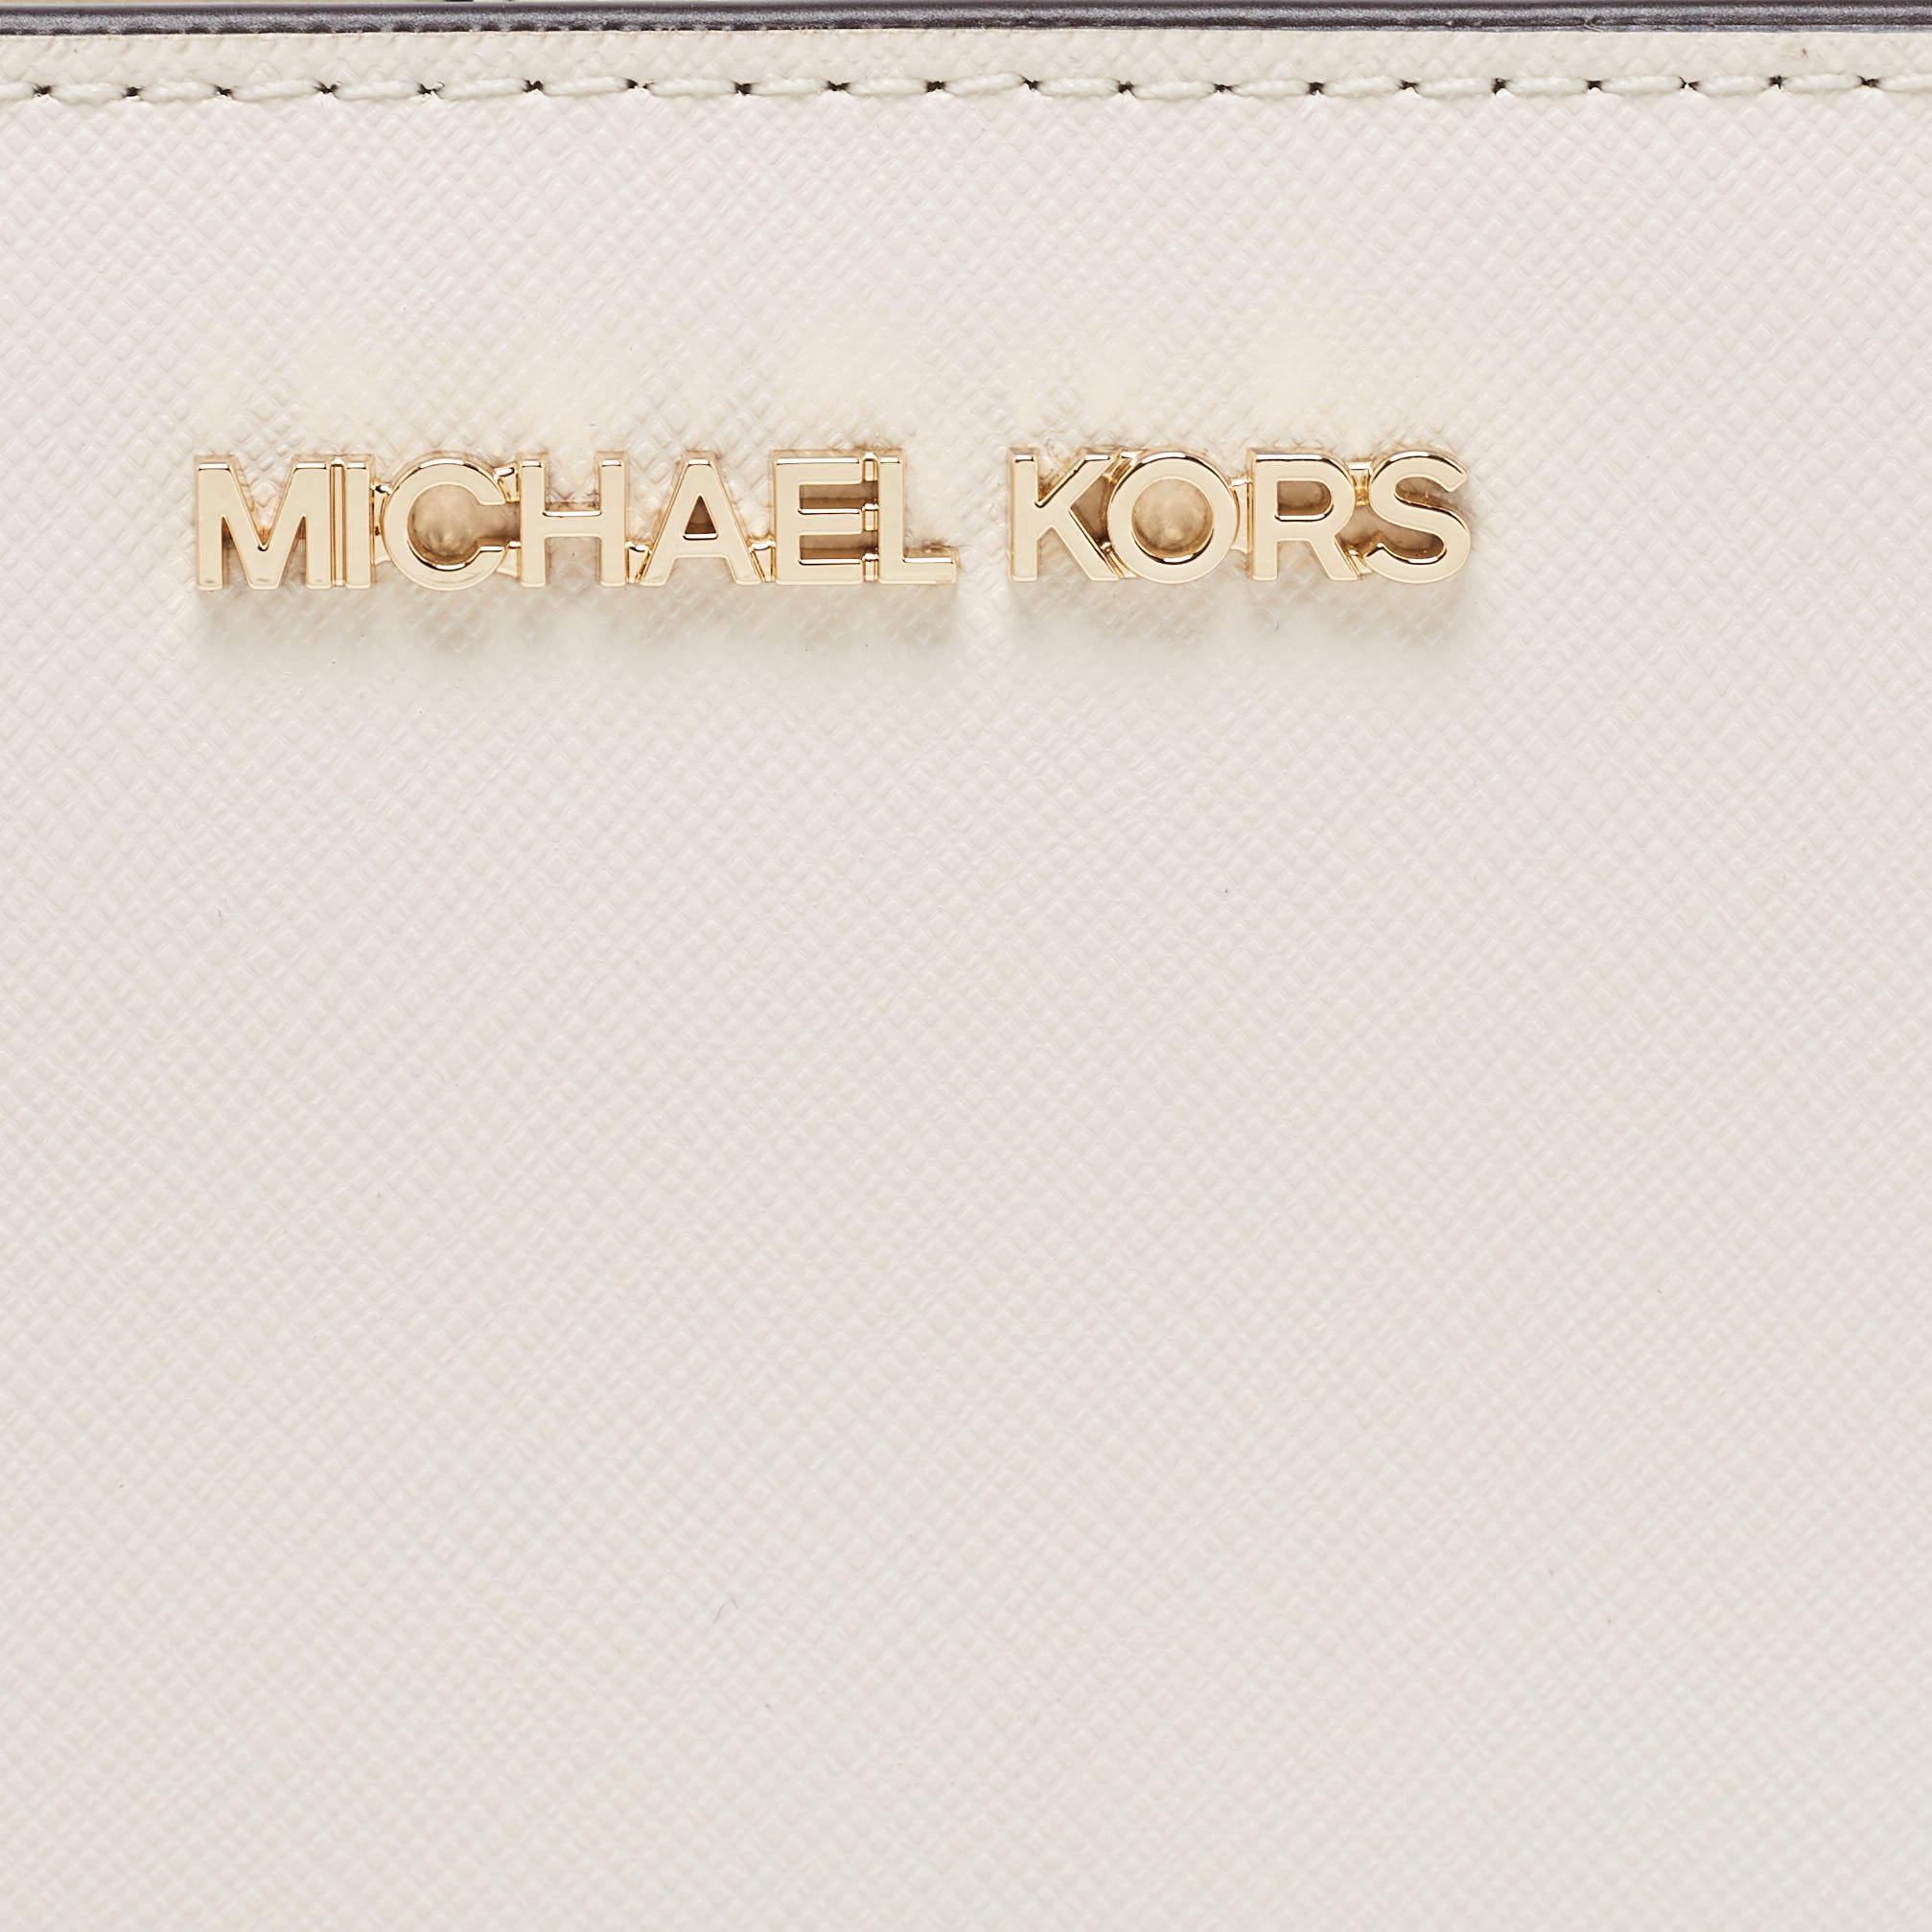 Michael Kors White Saffiano Leather Travel Jet Set French Wallet 7